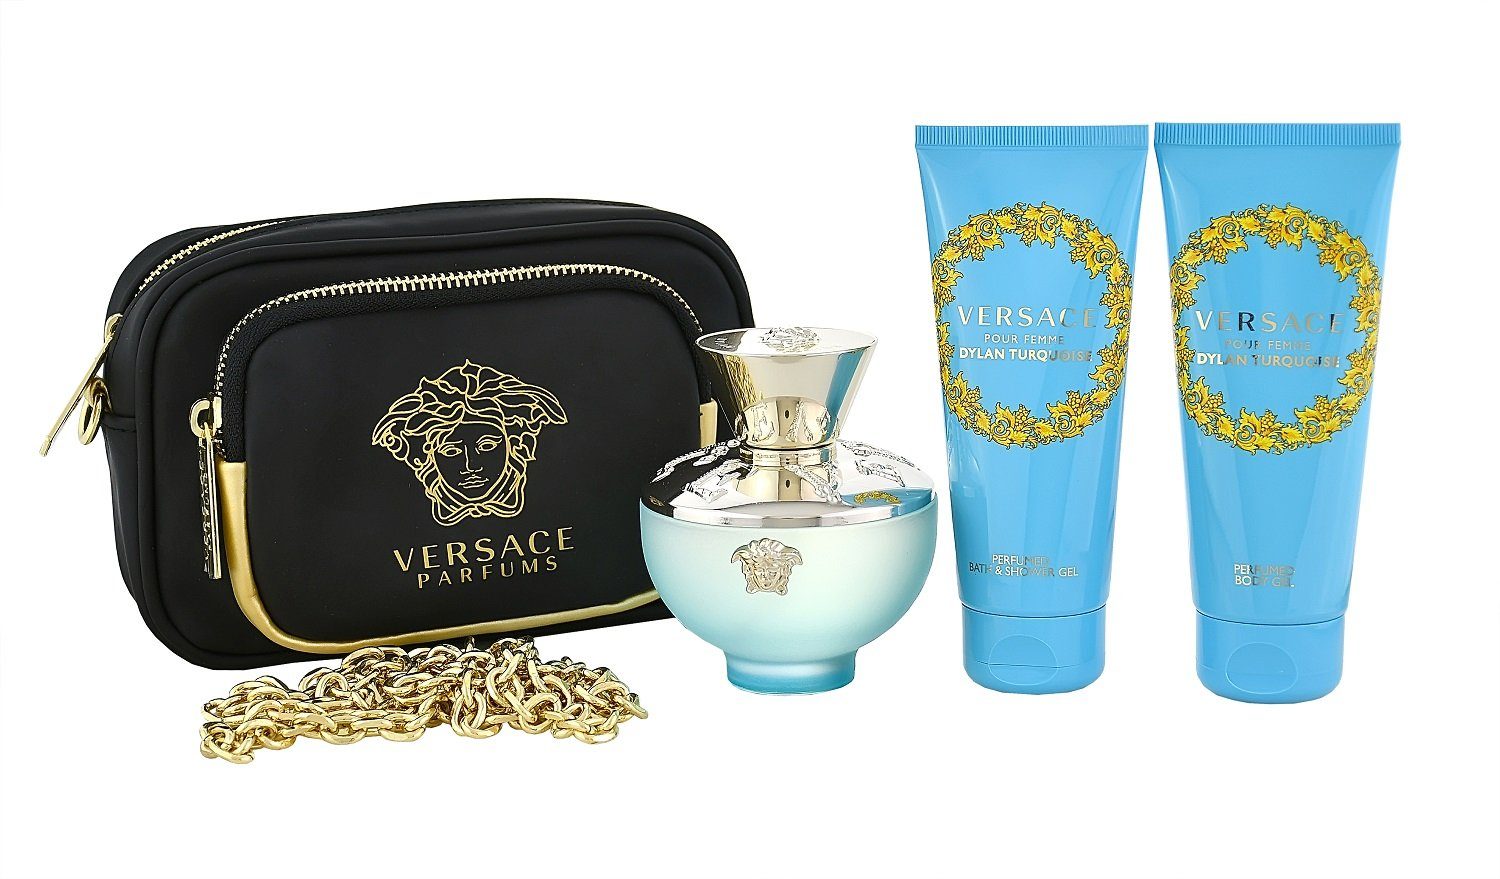 Versace + Versace + 100ml 100ml EDT BG Duft-Set pouch Dylan Turquoise 100ml SG +